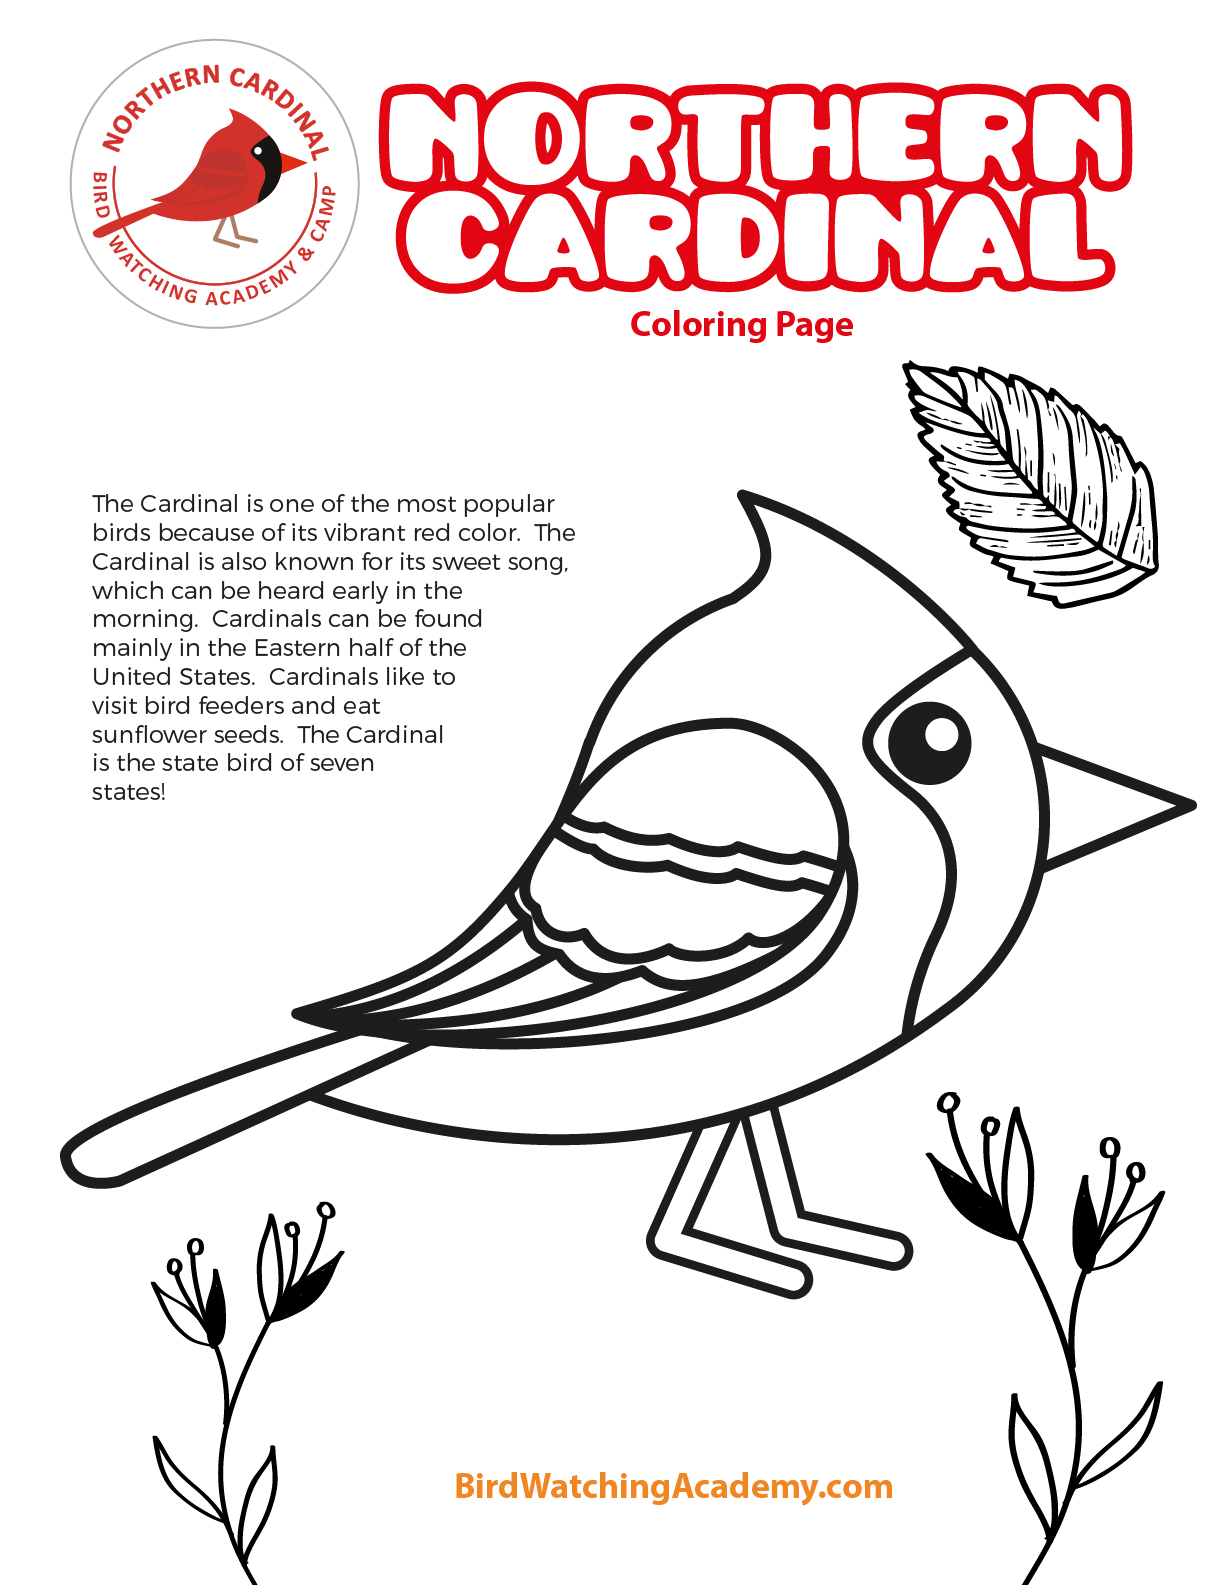 Northern cardinal coloring page